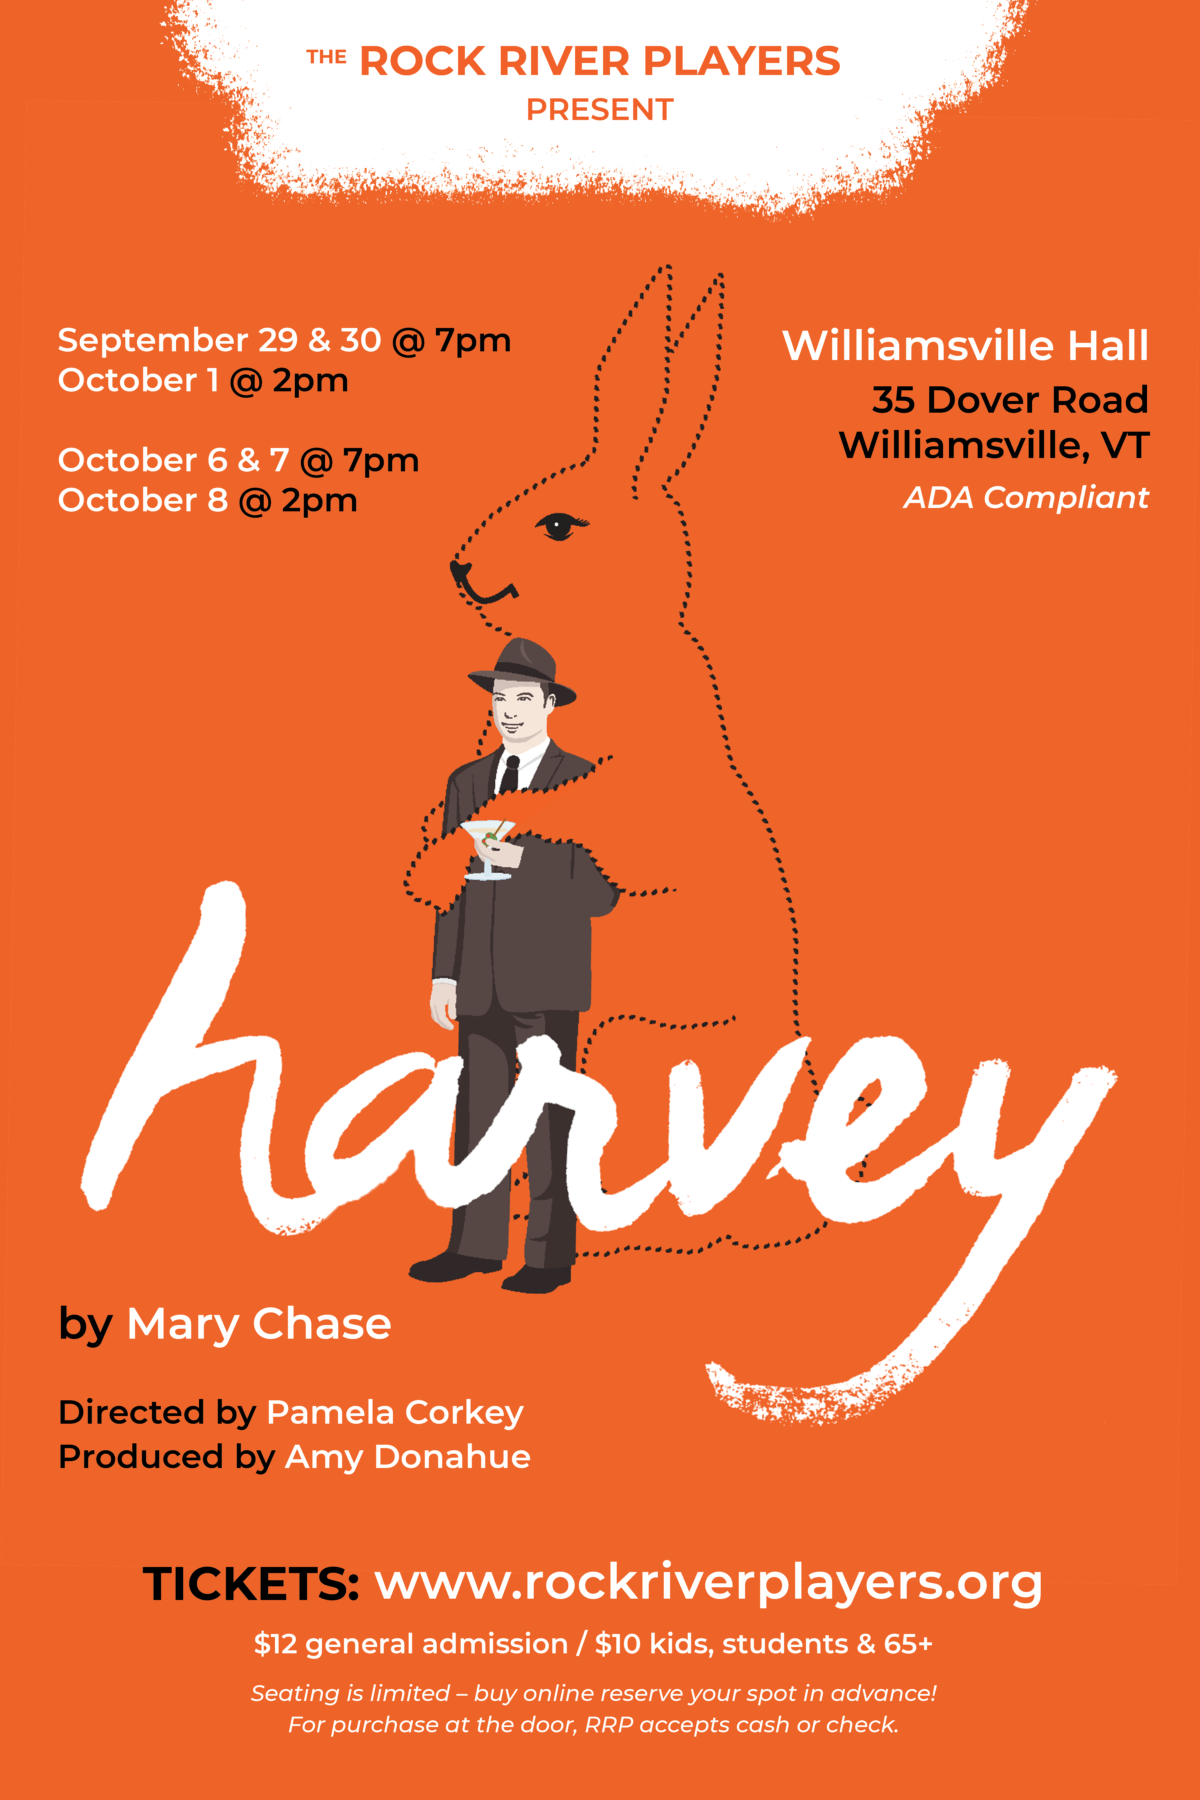 Rock River Players Presents “Harvey” in Williamsville, VT